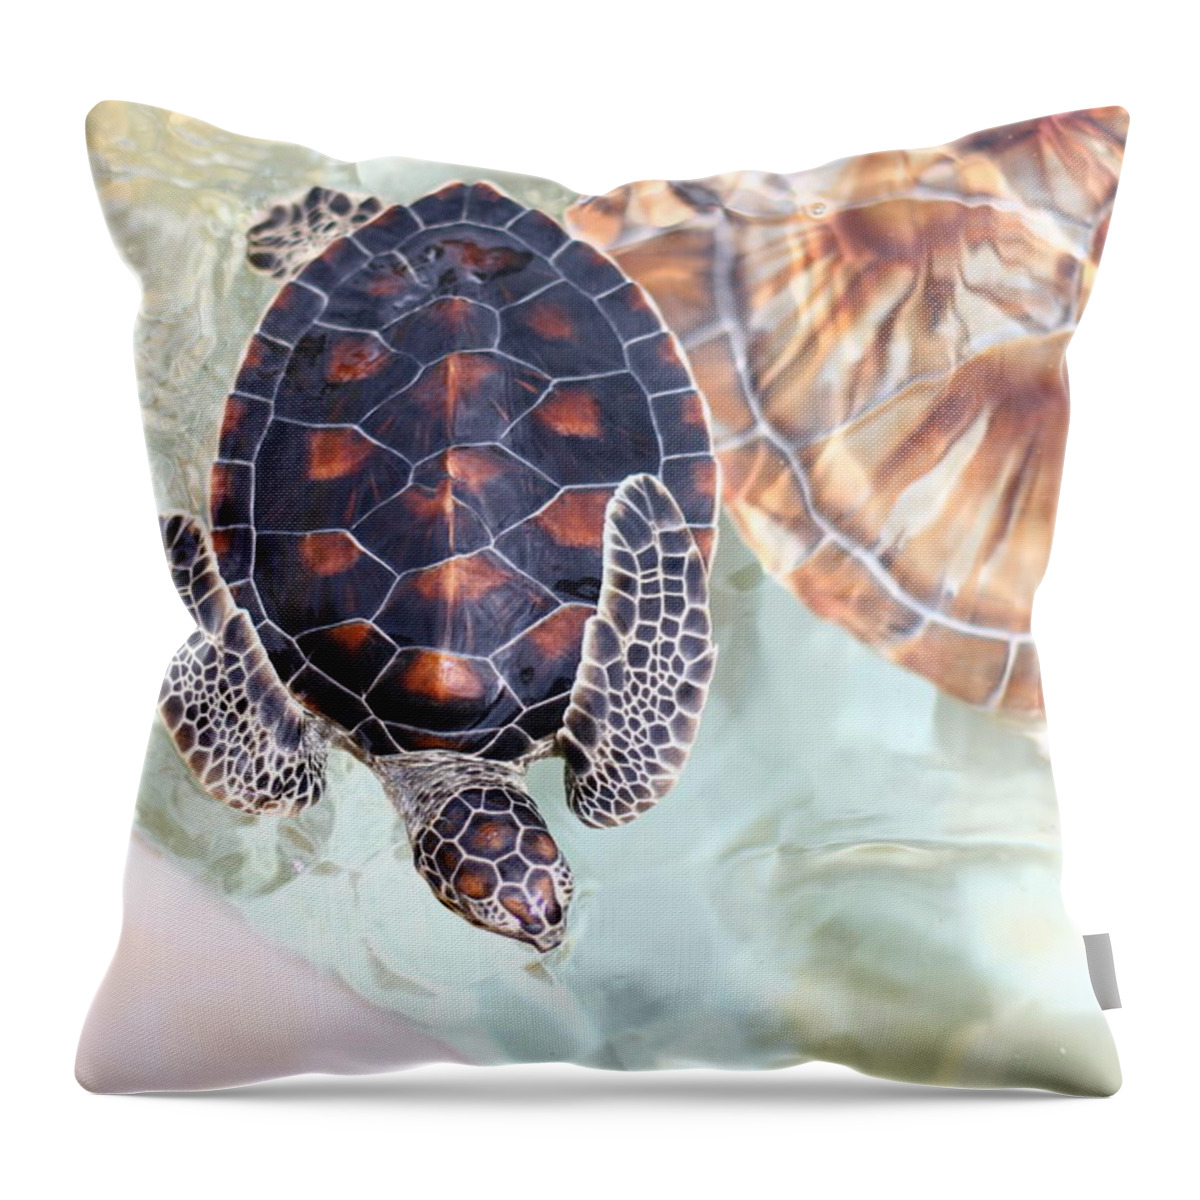 Underwater Throw Pillow featuring the photograph Sea Turtle by Alyssa B. Young